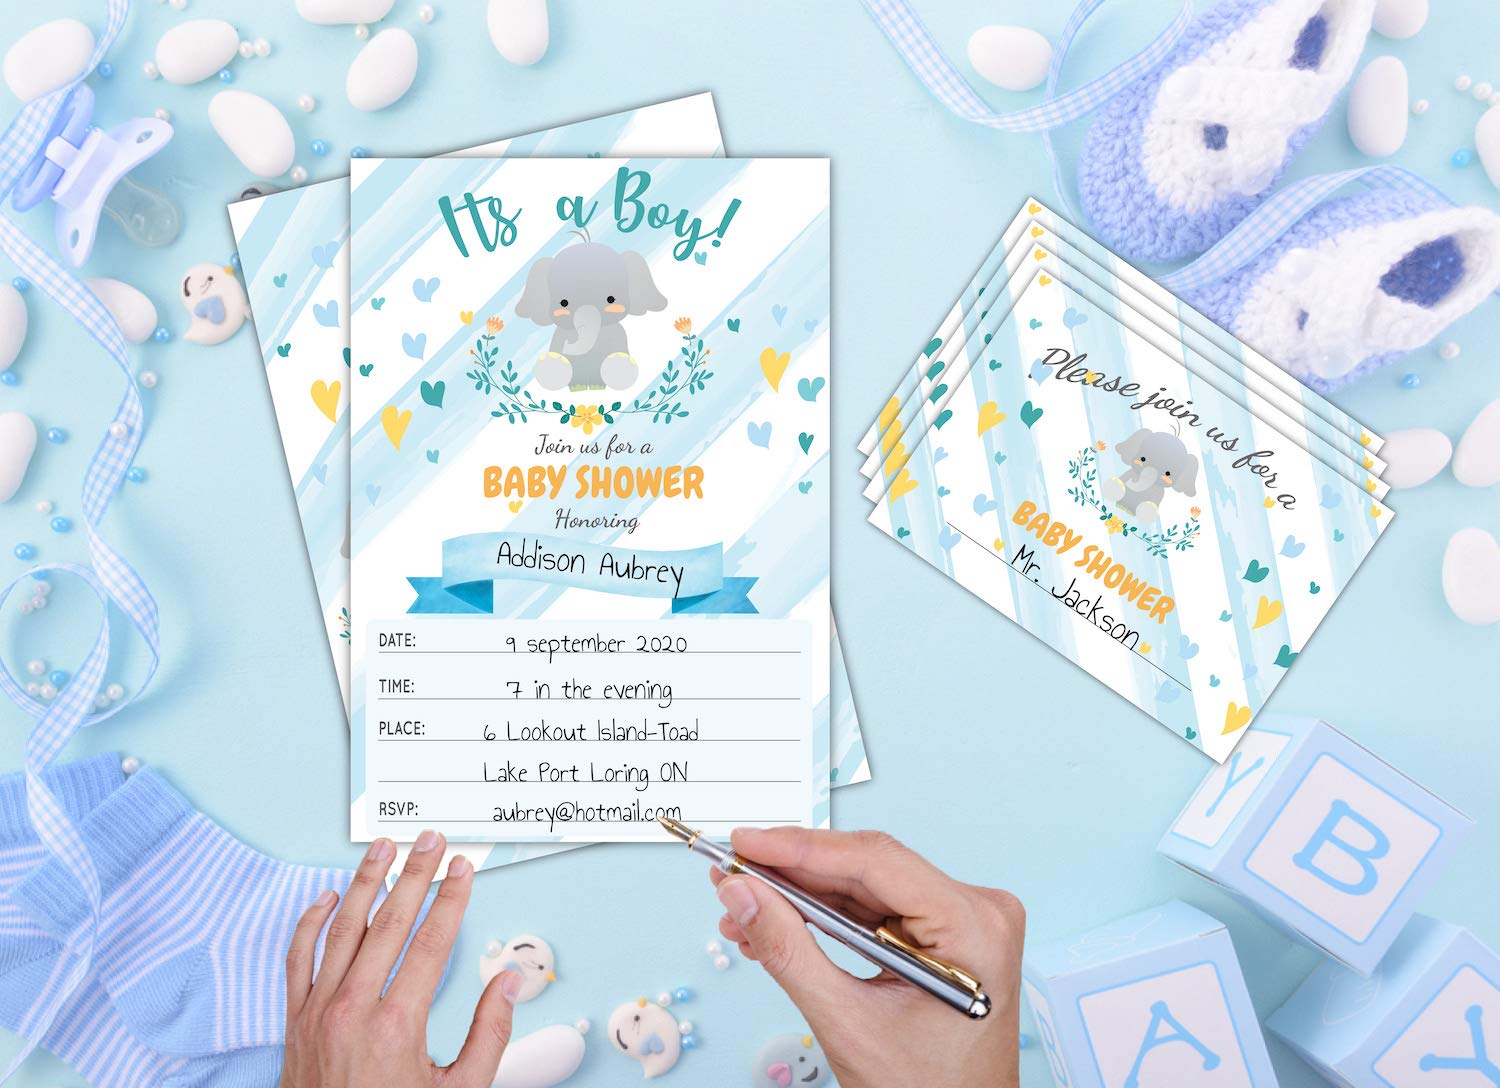 Avamie 20 Pack It's A Boy Blue Elephant Baby Shower Invitations with Envelopes and Stickers, Baby Shower Invitations For Boys